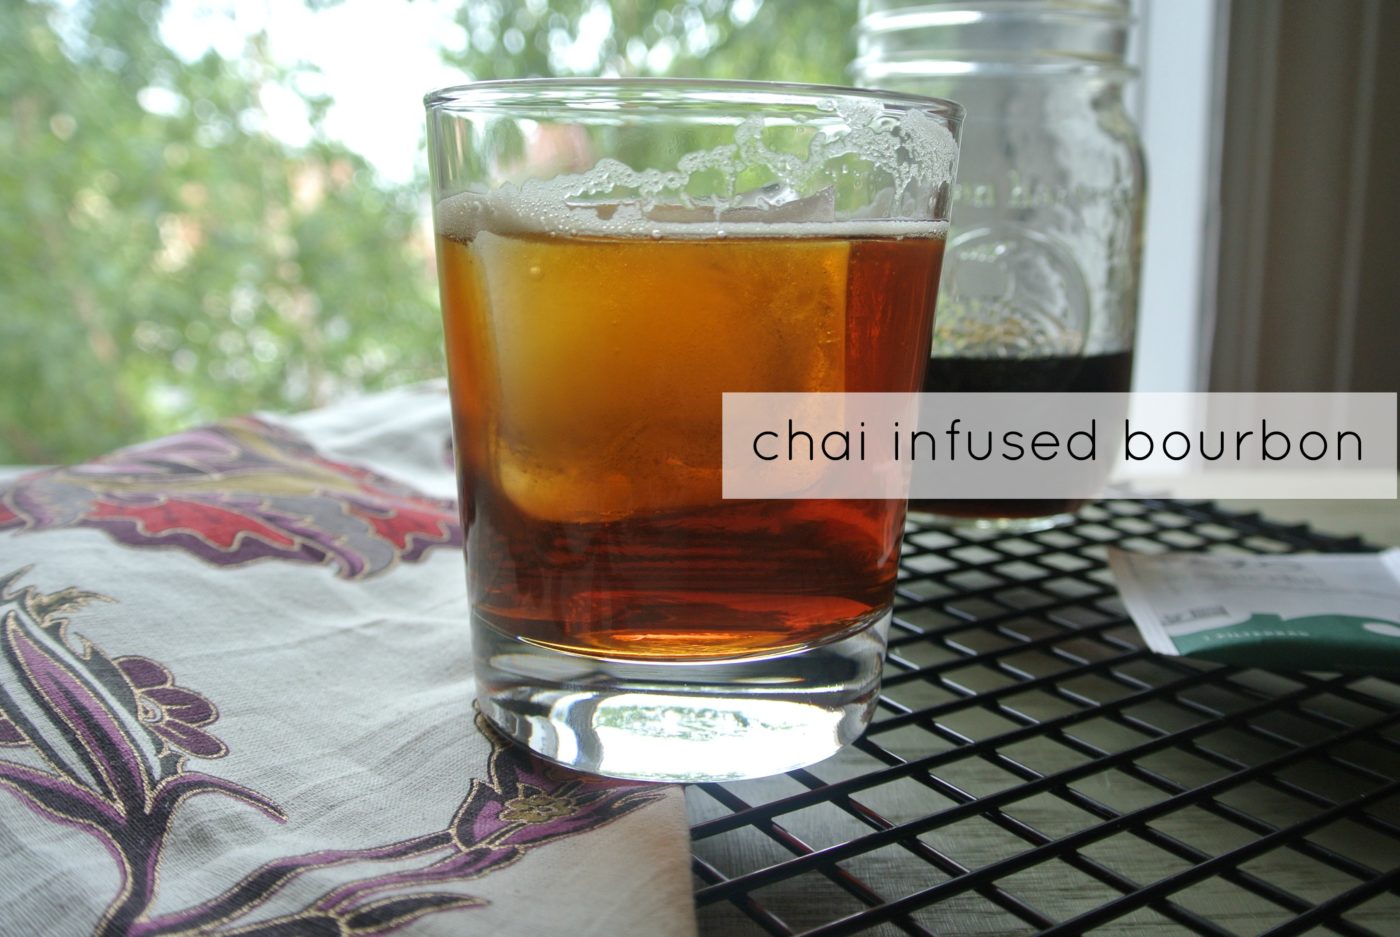 Infusing bourbon and chai is really easy and takes no time like some infusions.